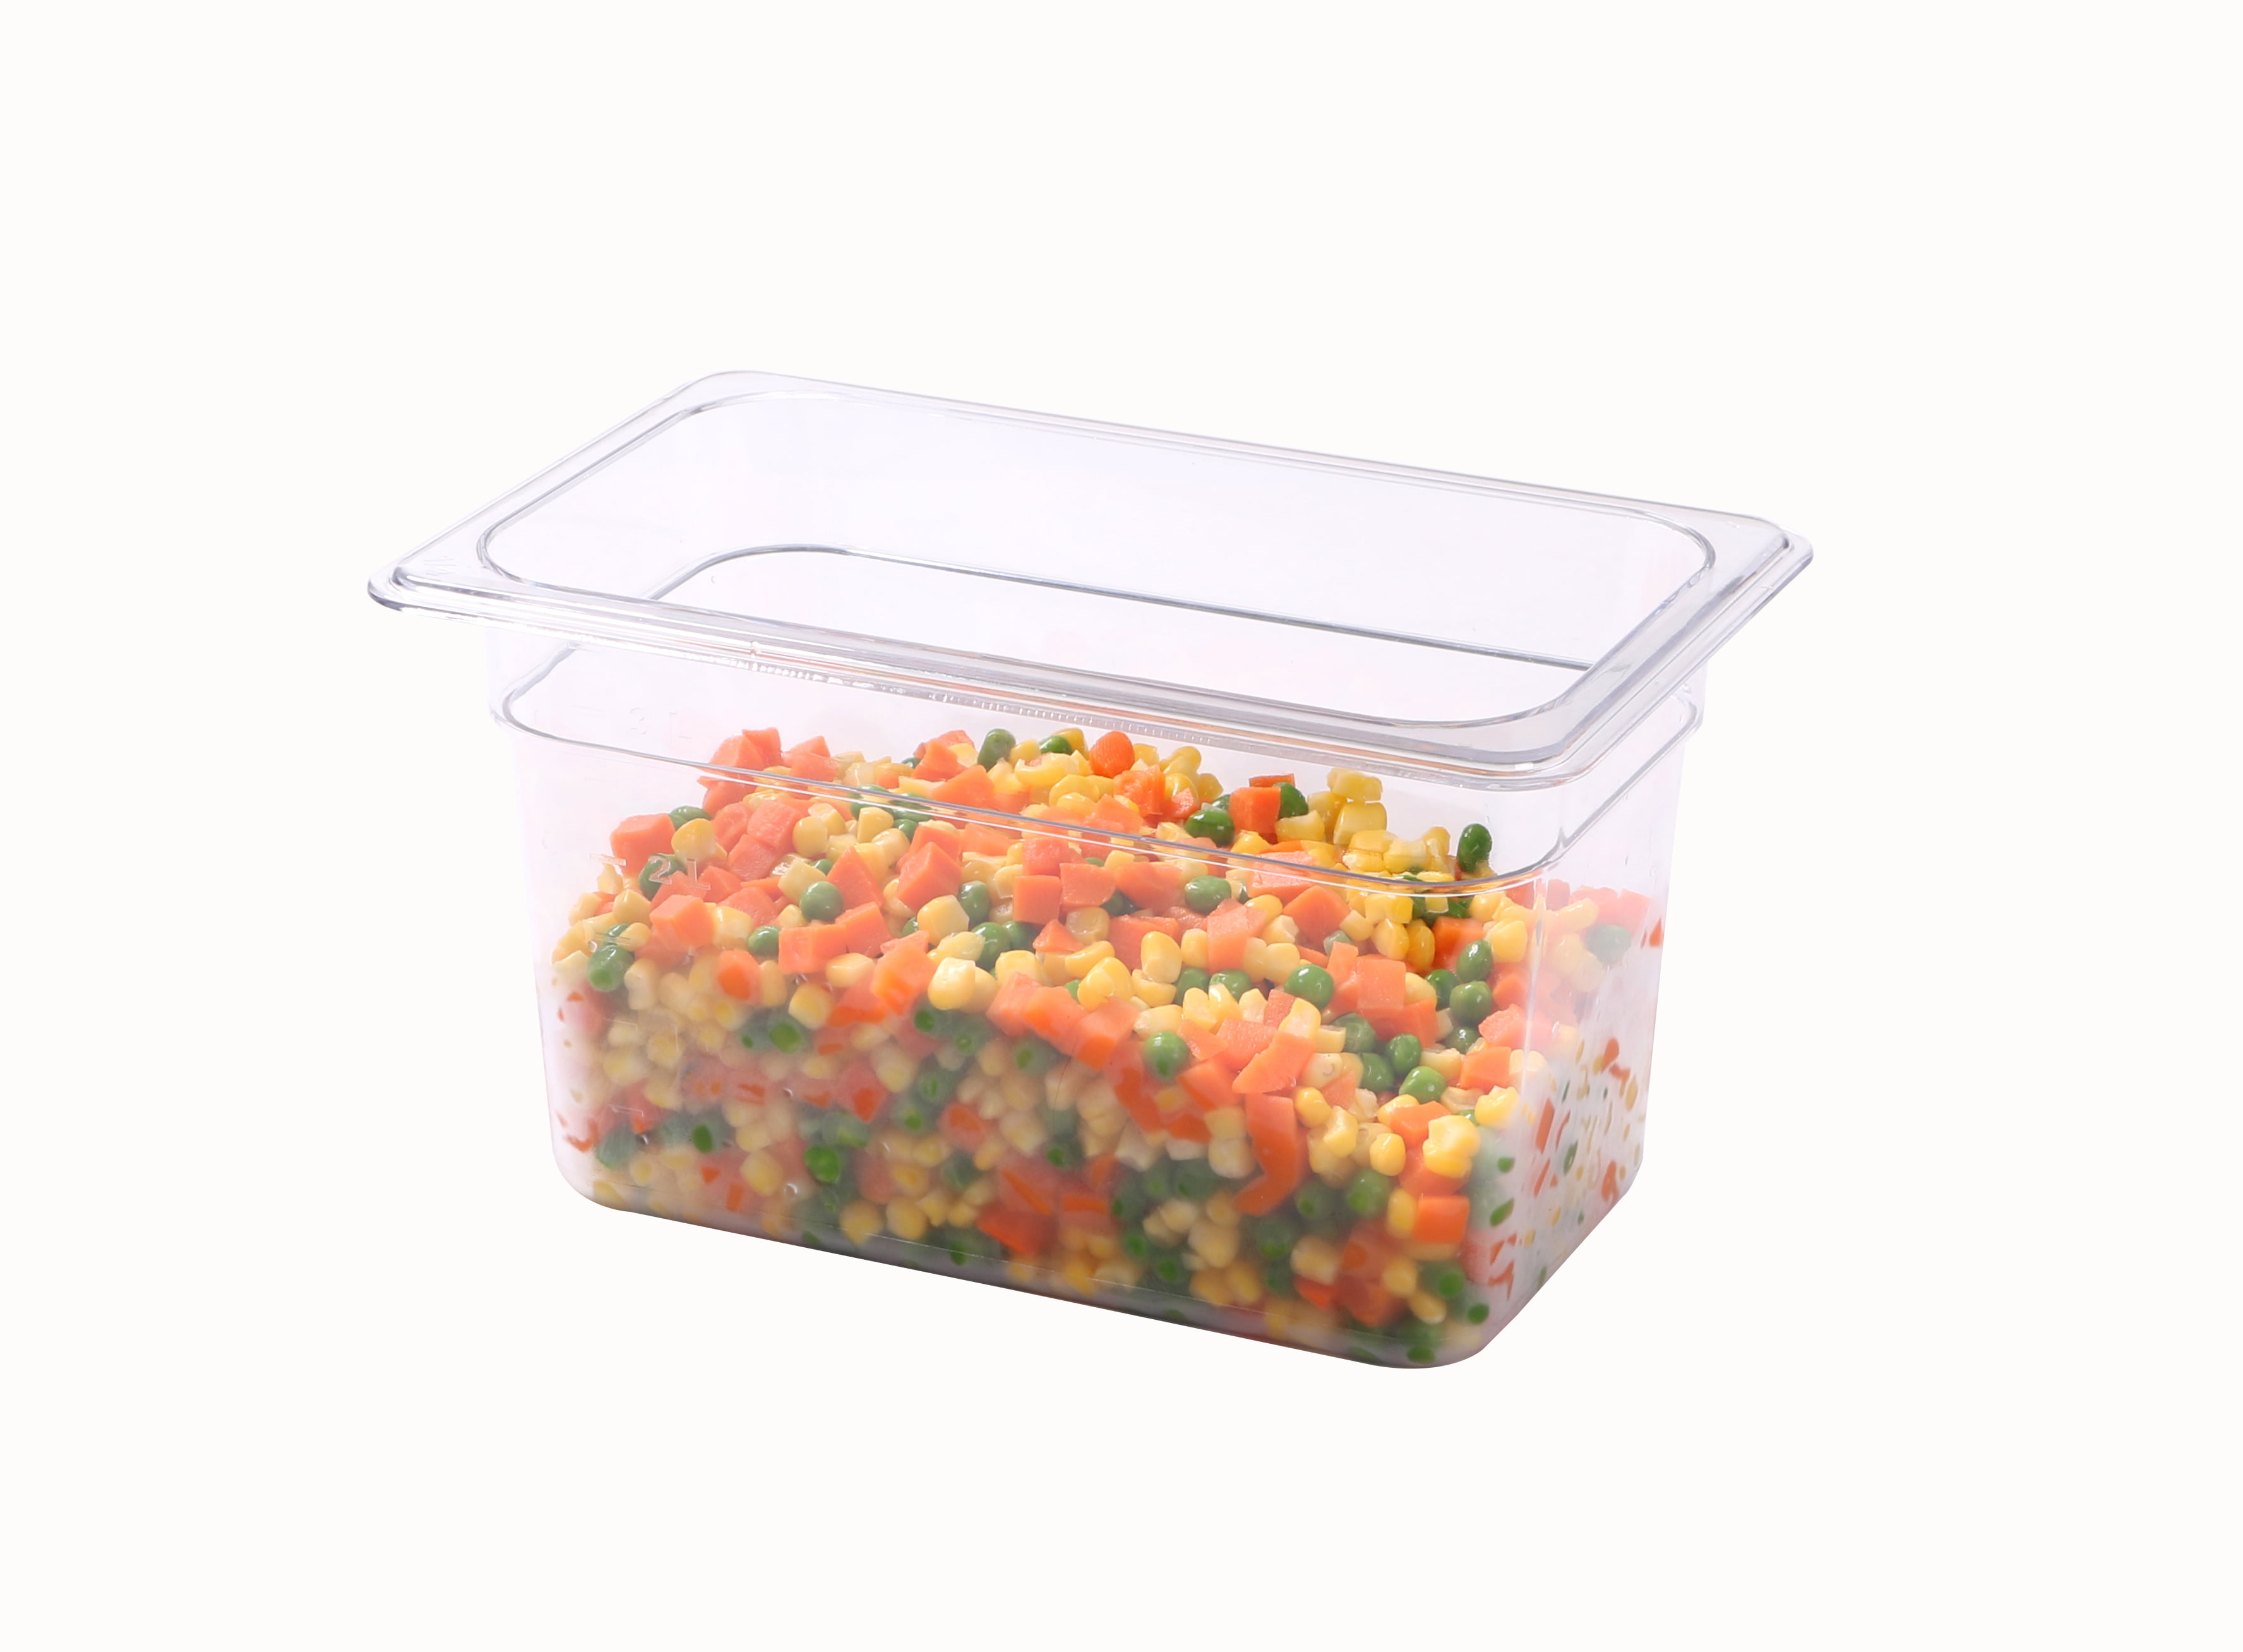 Cold Food Pan - Plastic Cold Food Storage Container - 1/3 Size - 4 inch Deep - 1ct Box - Met Lux, Size: One-Third size, Clear